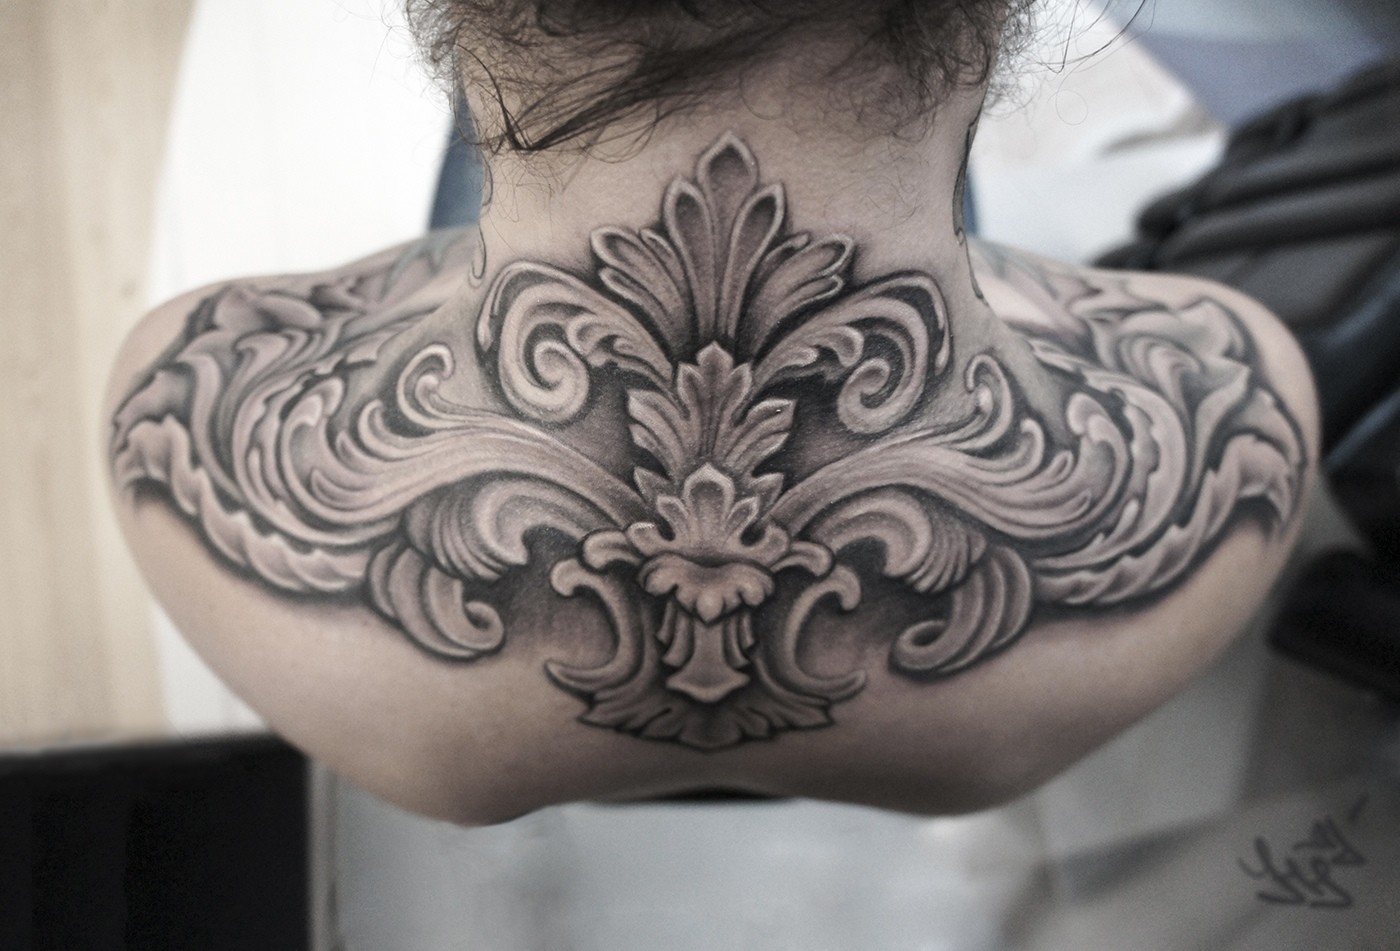 Neck Tattoos  Back of the Neck Tattoos  Inked Magazine  Tattoo Ideas  Artists and Models